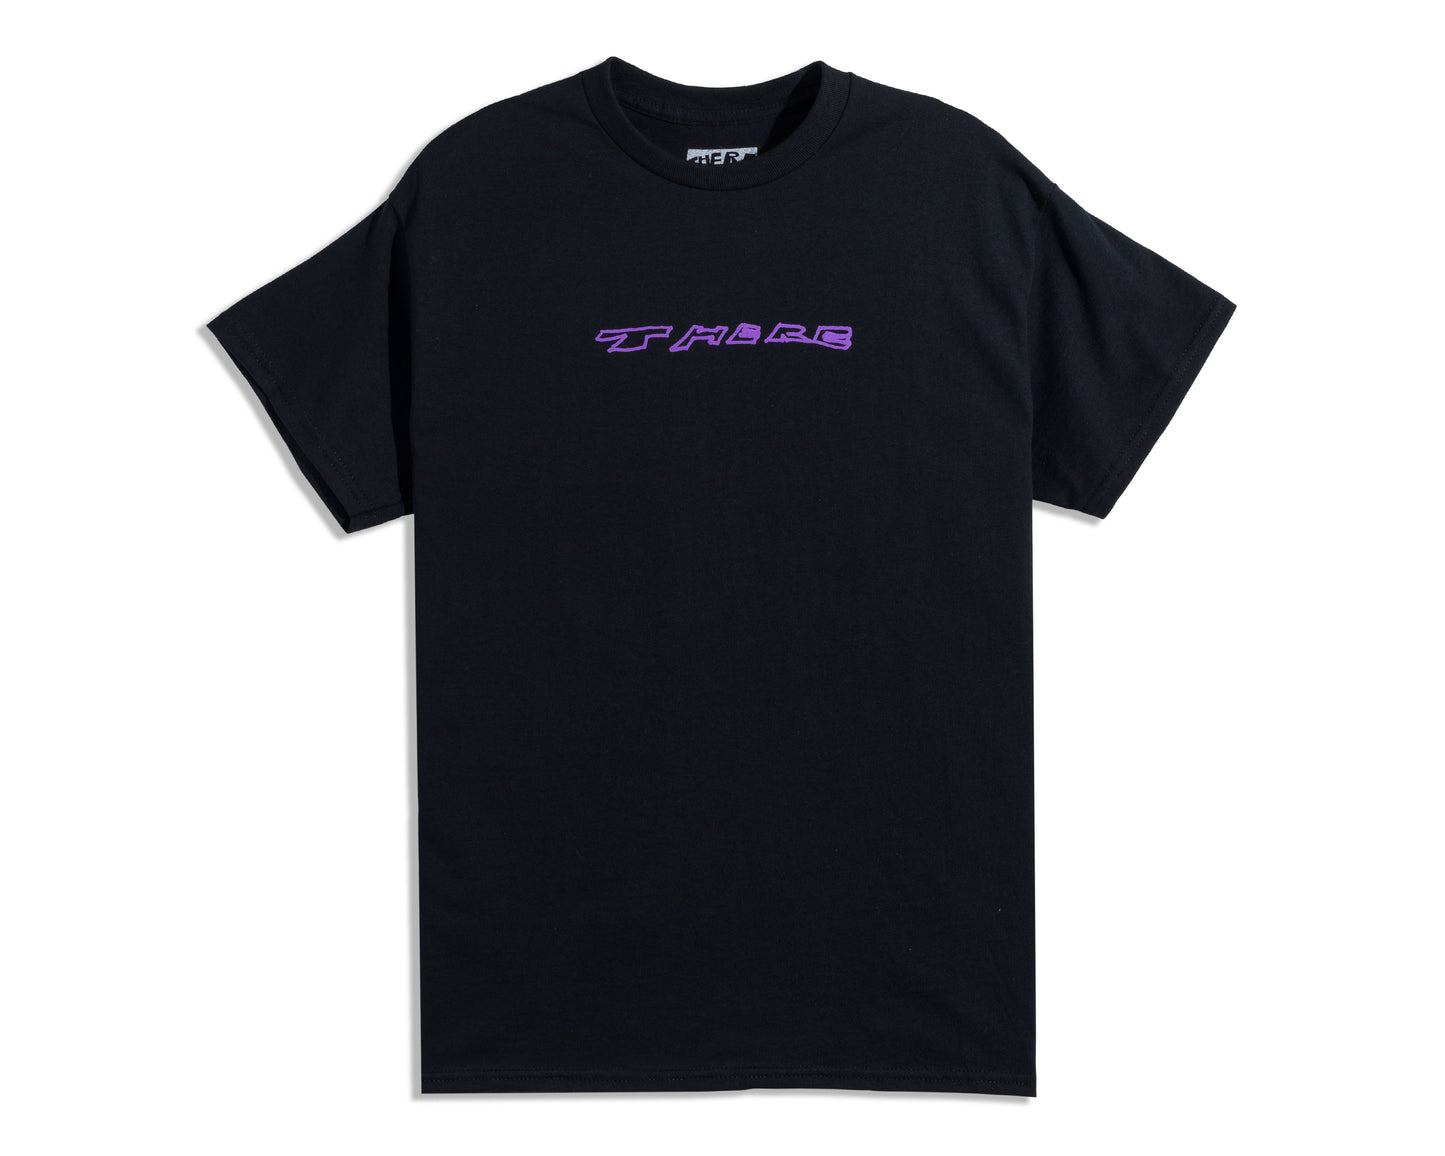 "Squashed" tee